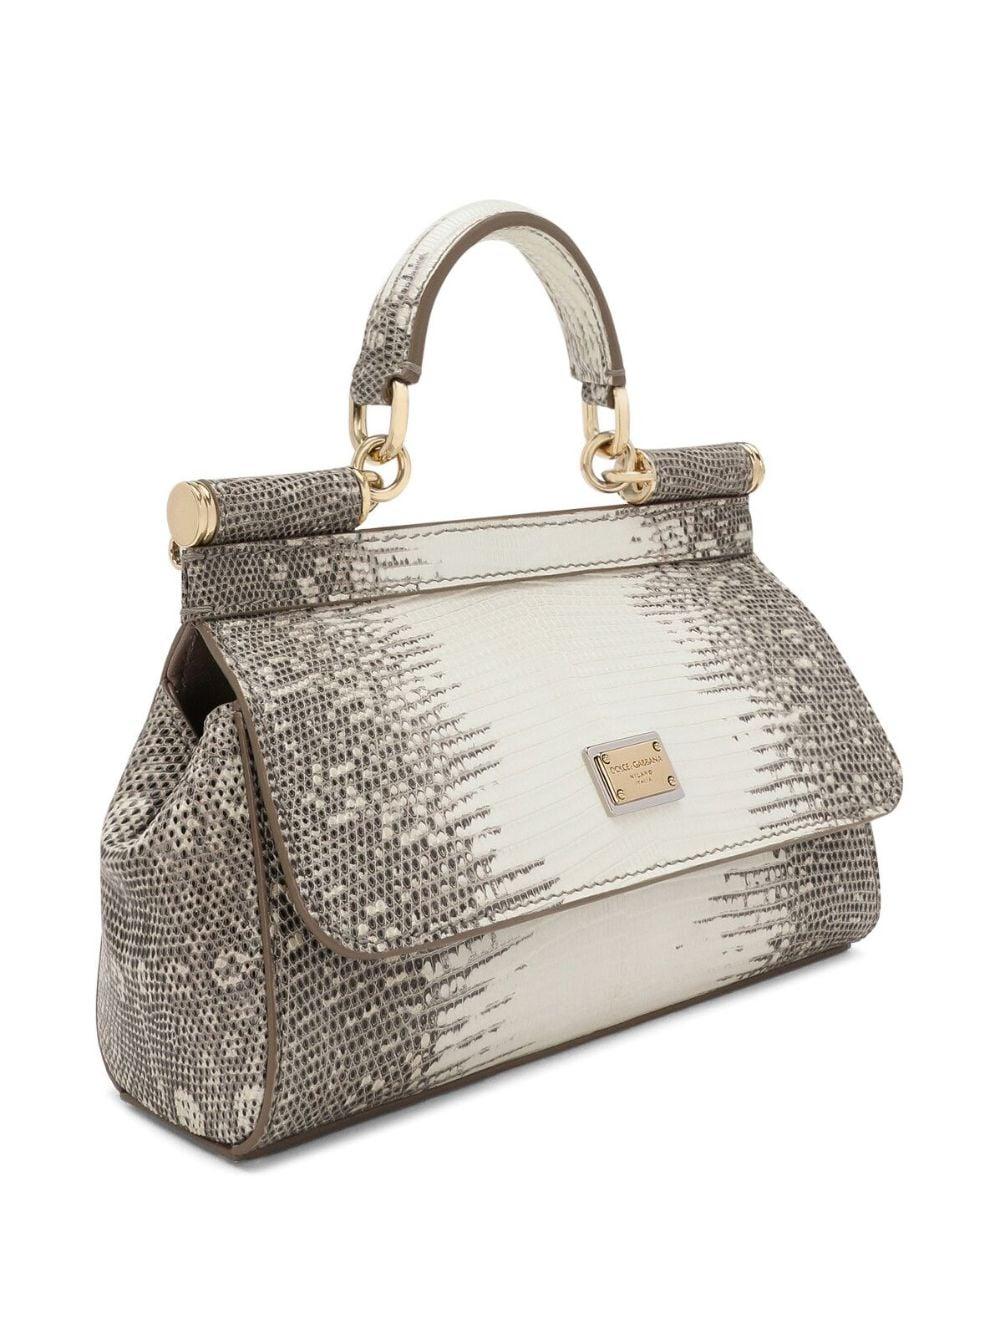 Totes bags Dolce & Gabbana - Sicily Limited Edition small bag